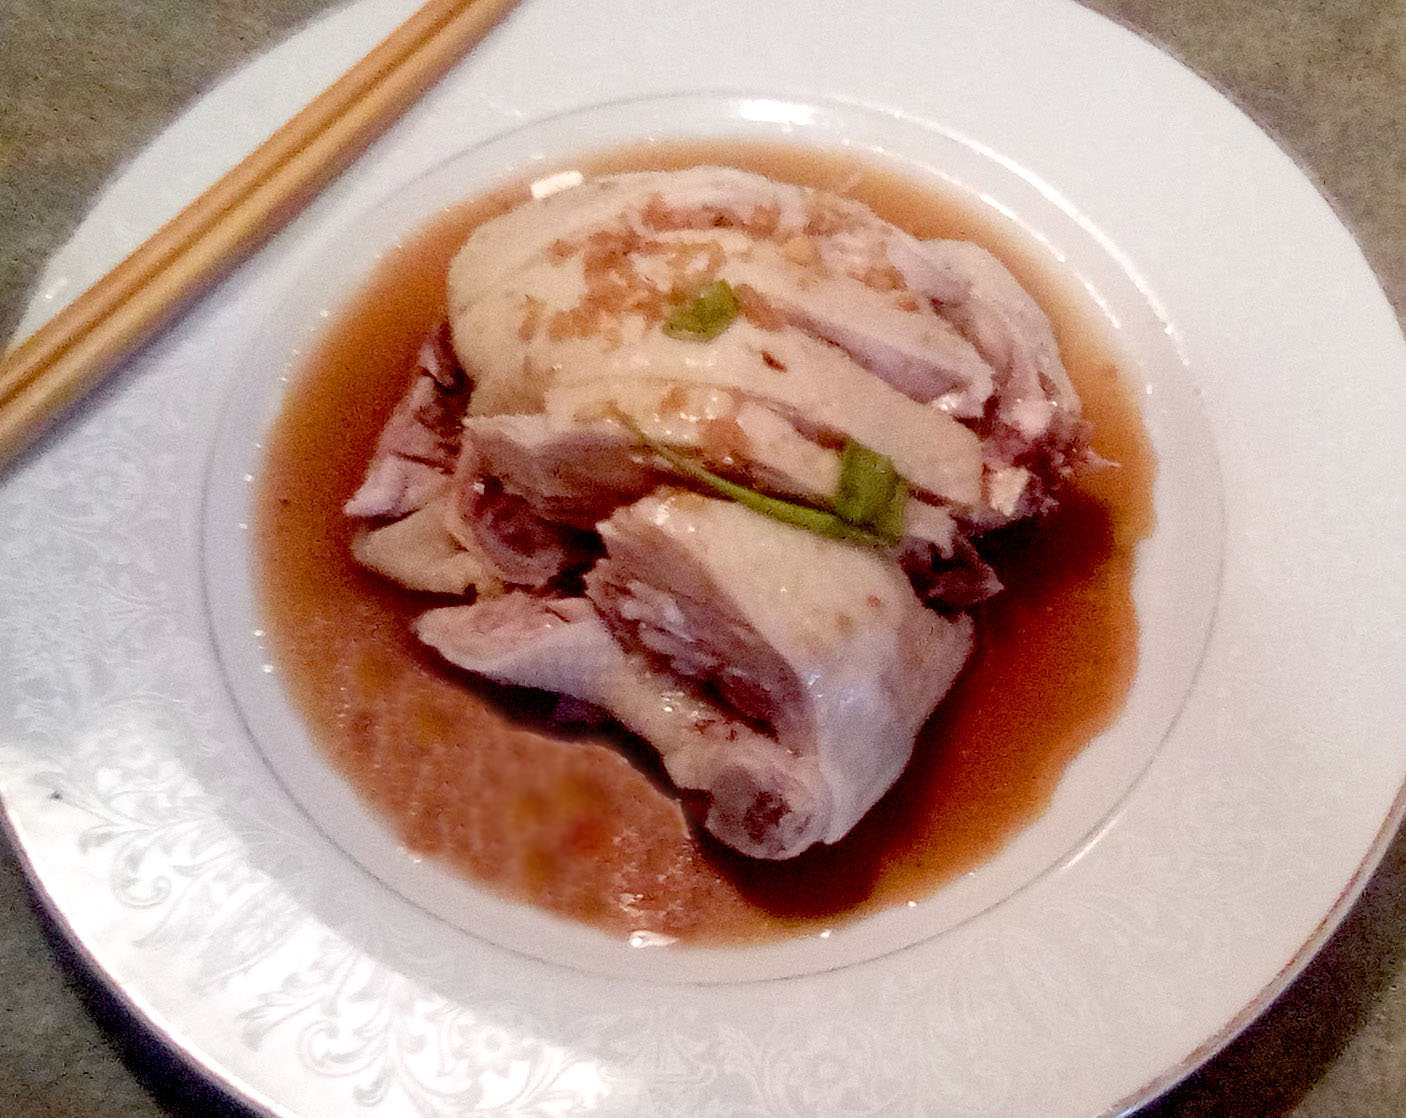 On a white plate, there is hacked chicken, light in color in a thin brown sauce. Photo by Paul Young.